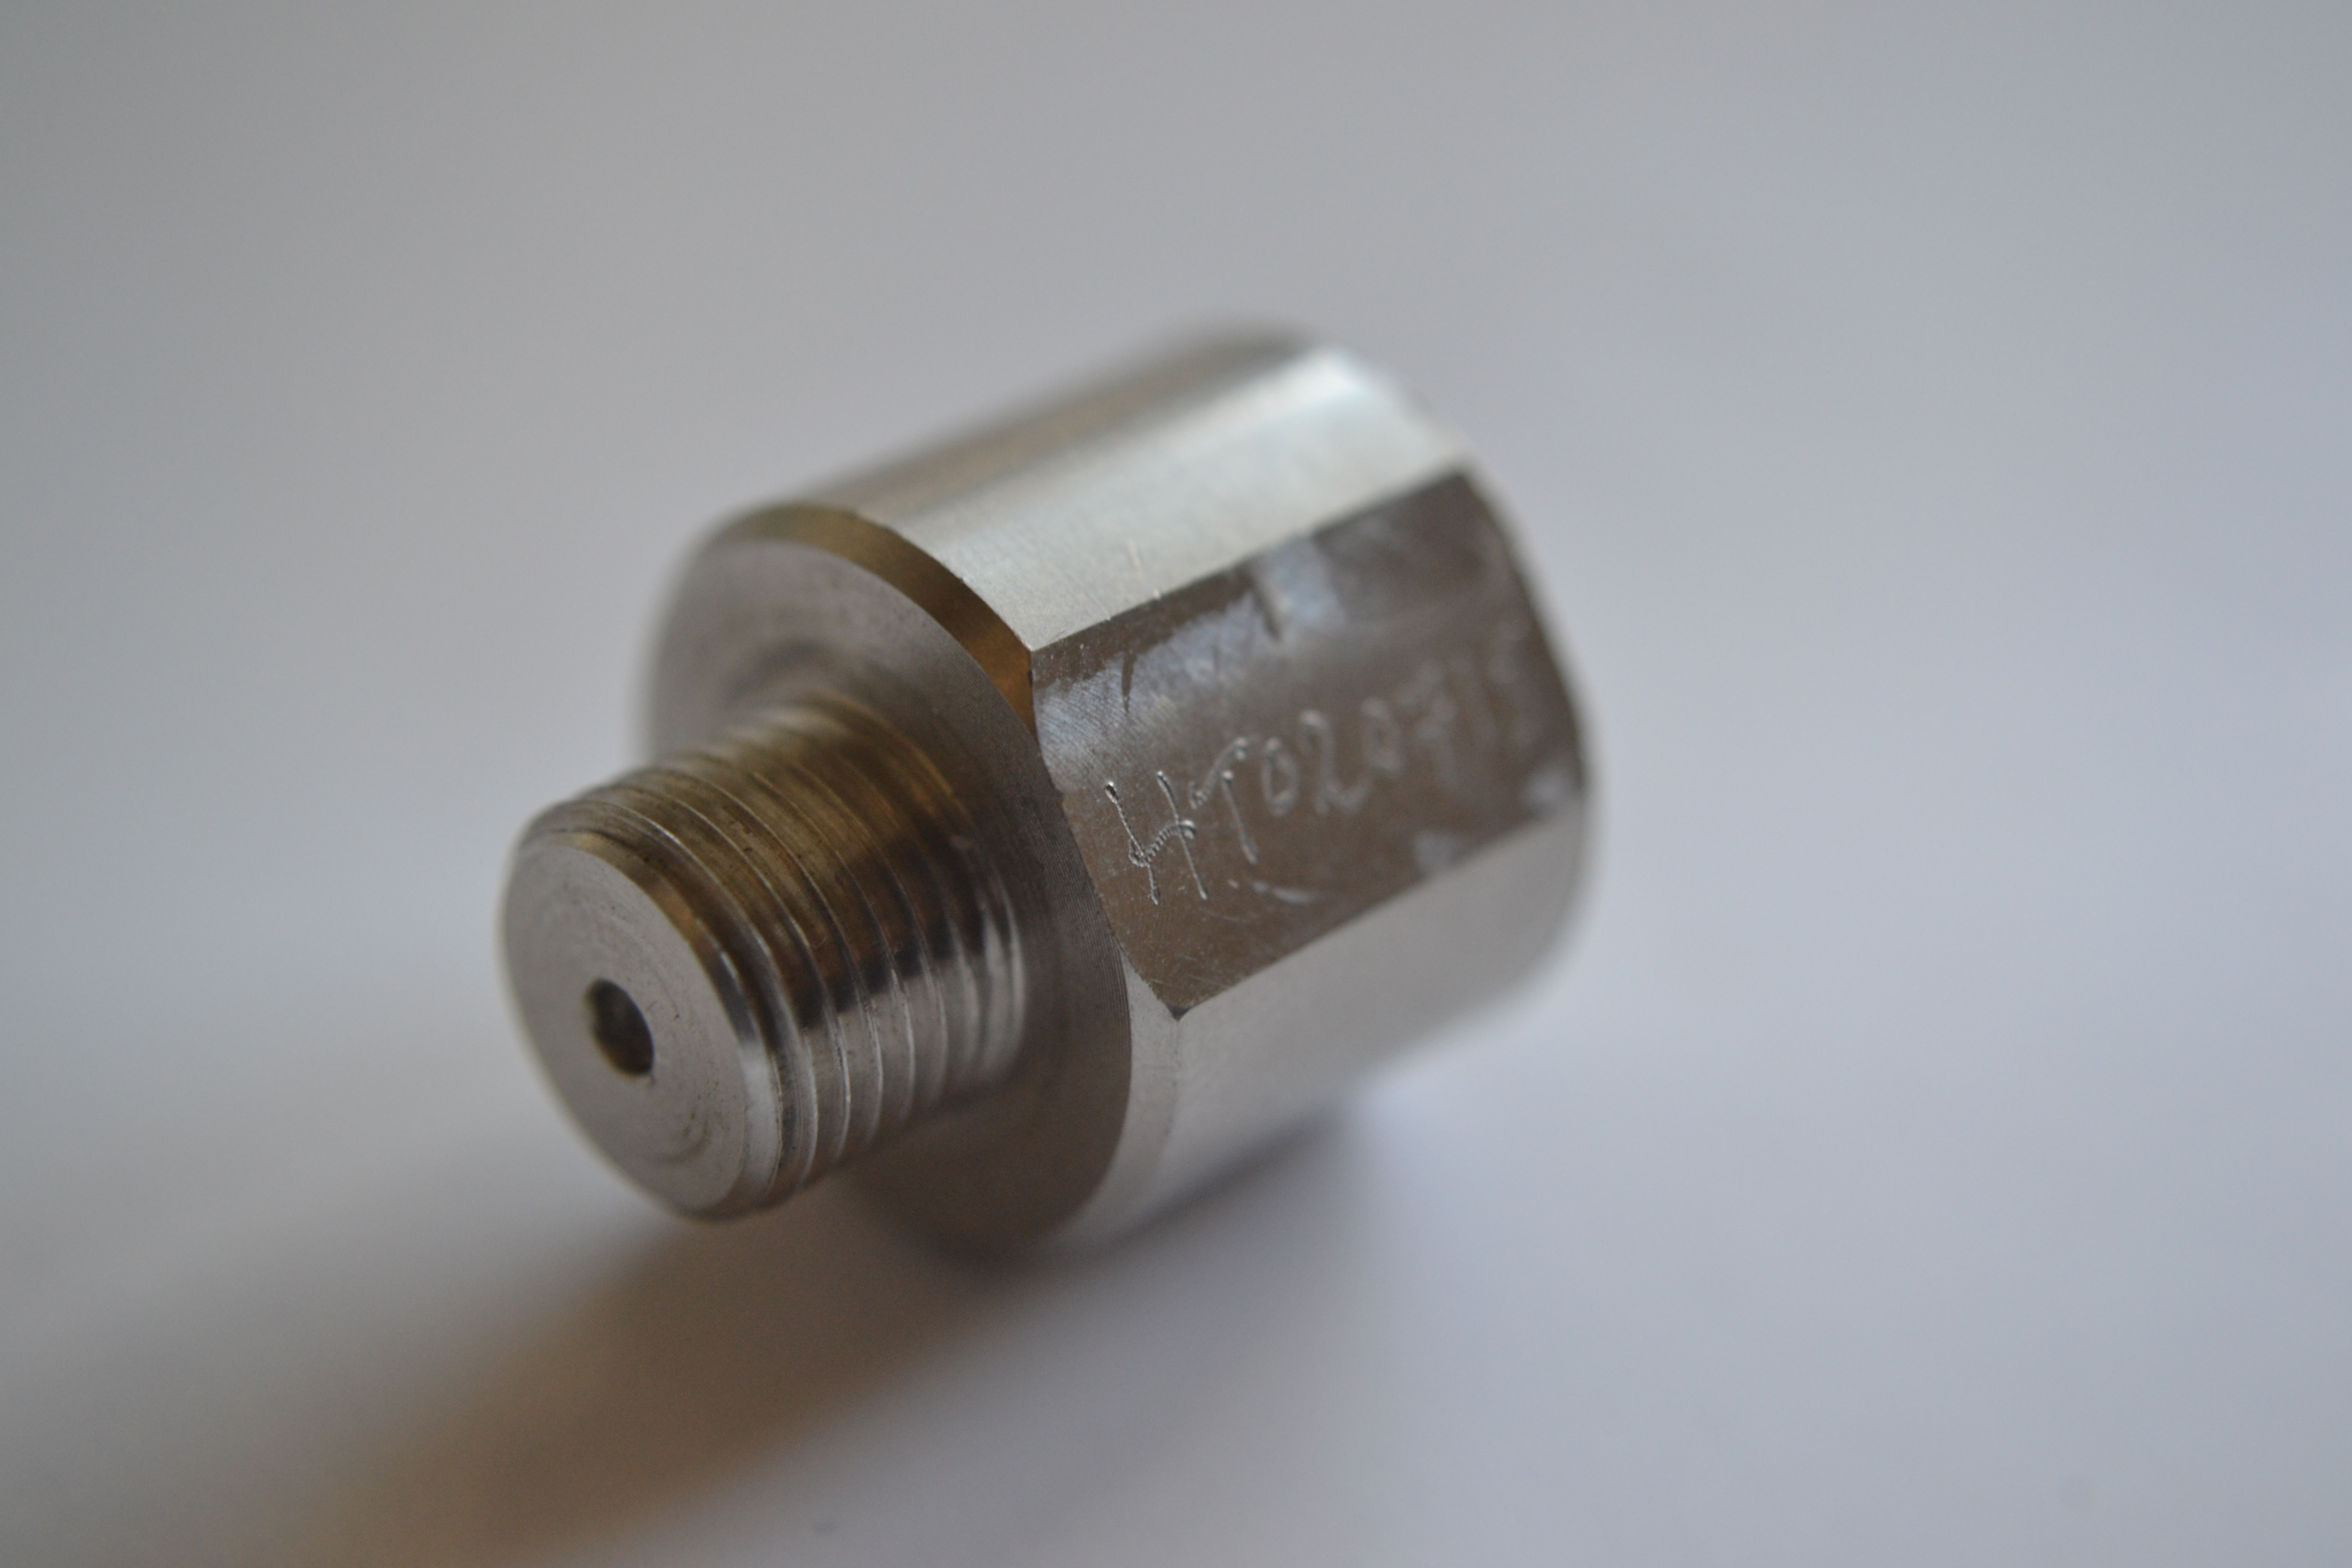 In-line reference leak comprising a stainless-steel sinter contained in a standard stainless steel housing with an 1/8 inch BSPP Male thread at one end and a 1/8 inch BSPP Female thread at the other.